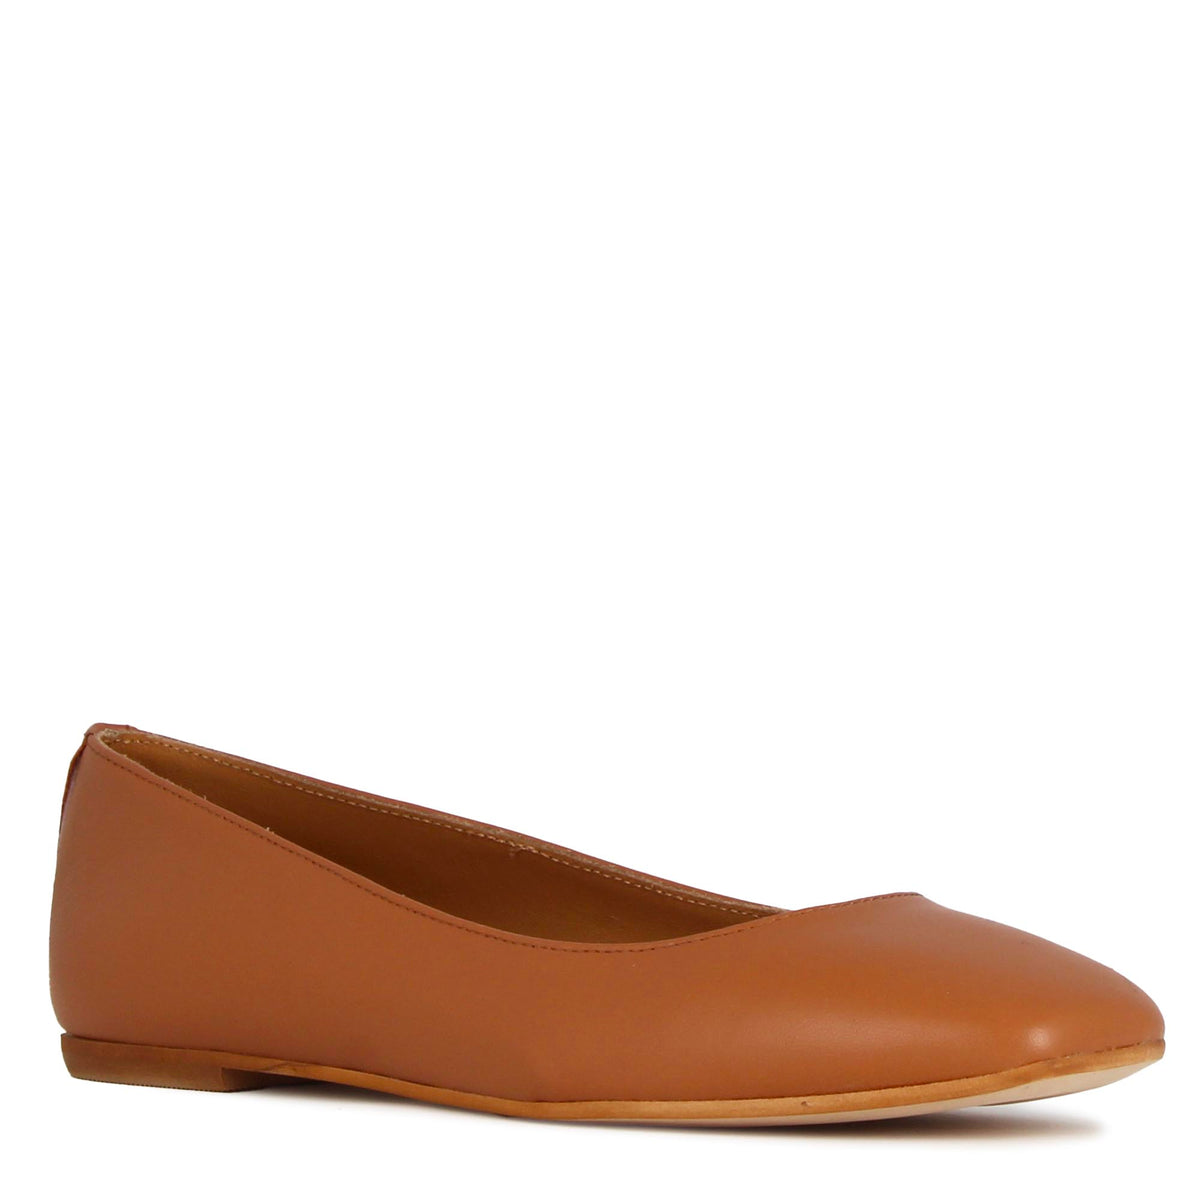 Handmade women's casual ballet flat in brown smooth leather